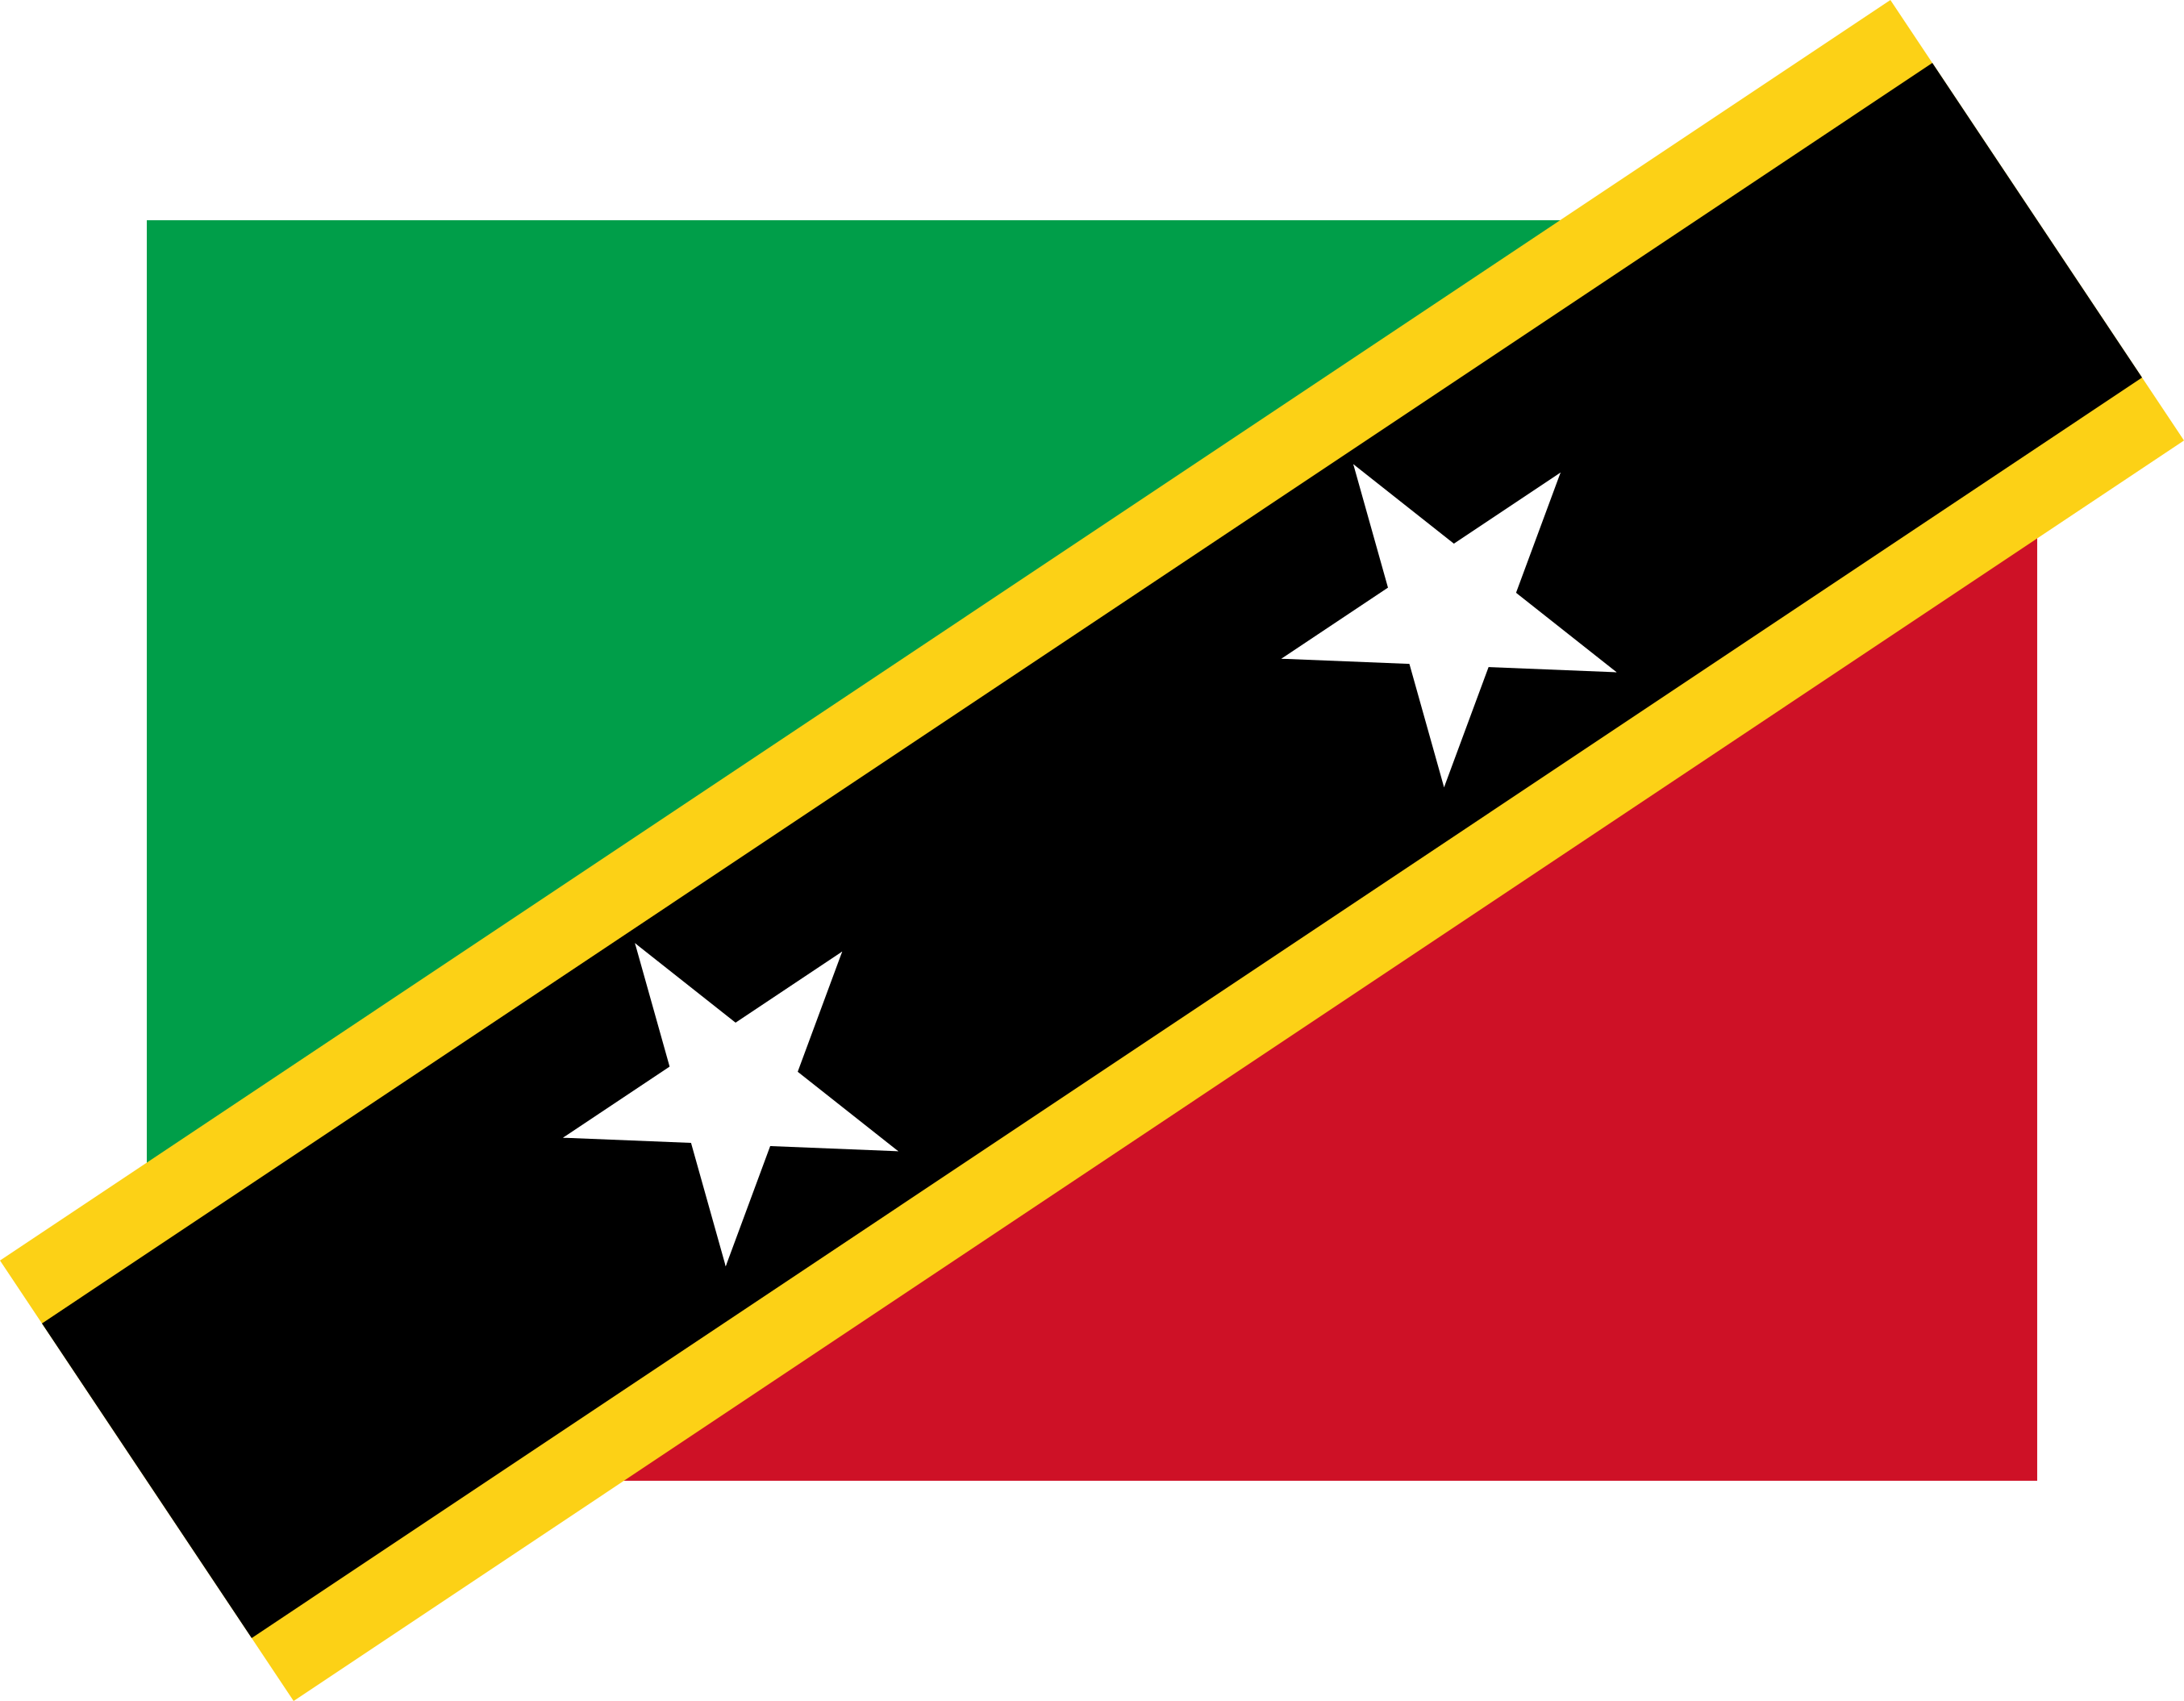 Saint Kitts and Nevis Flag Image - Free Download